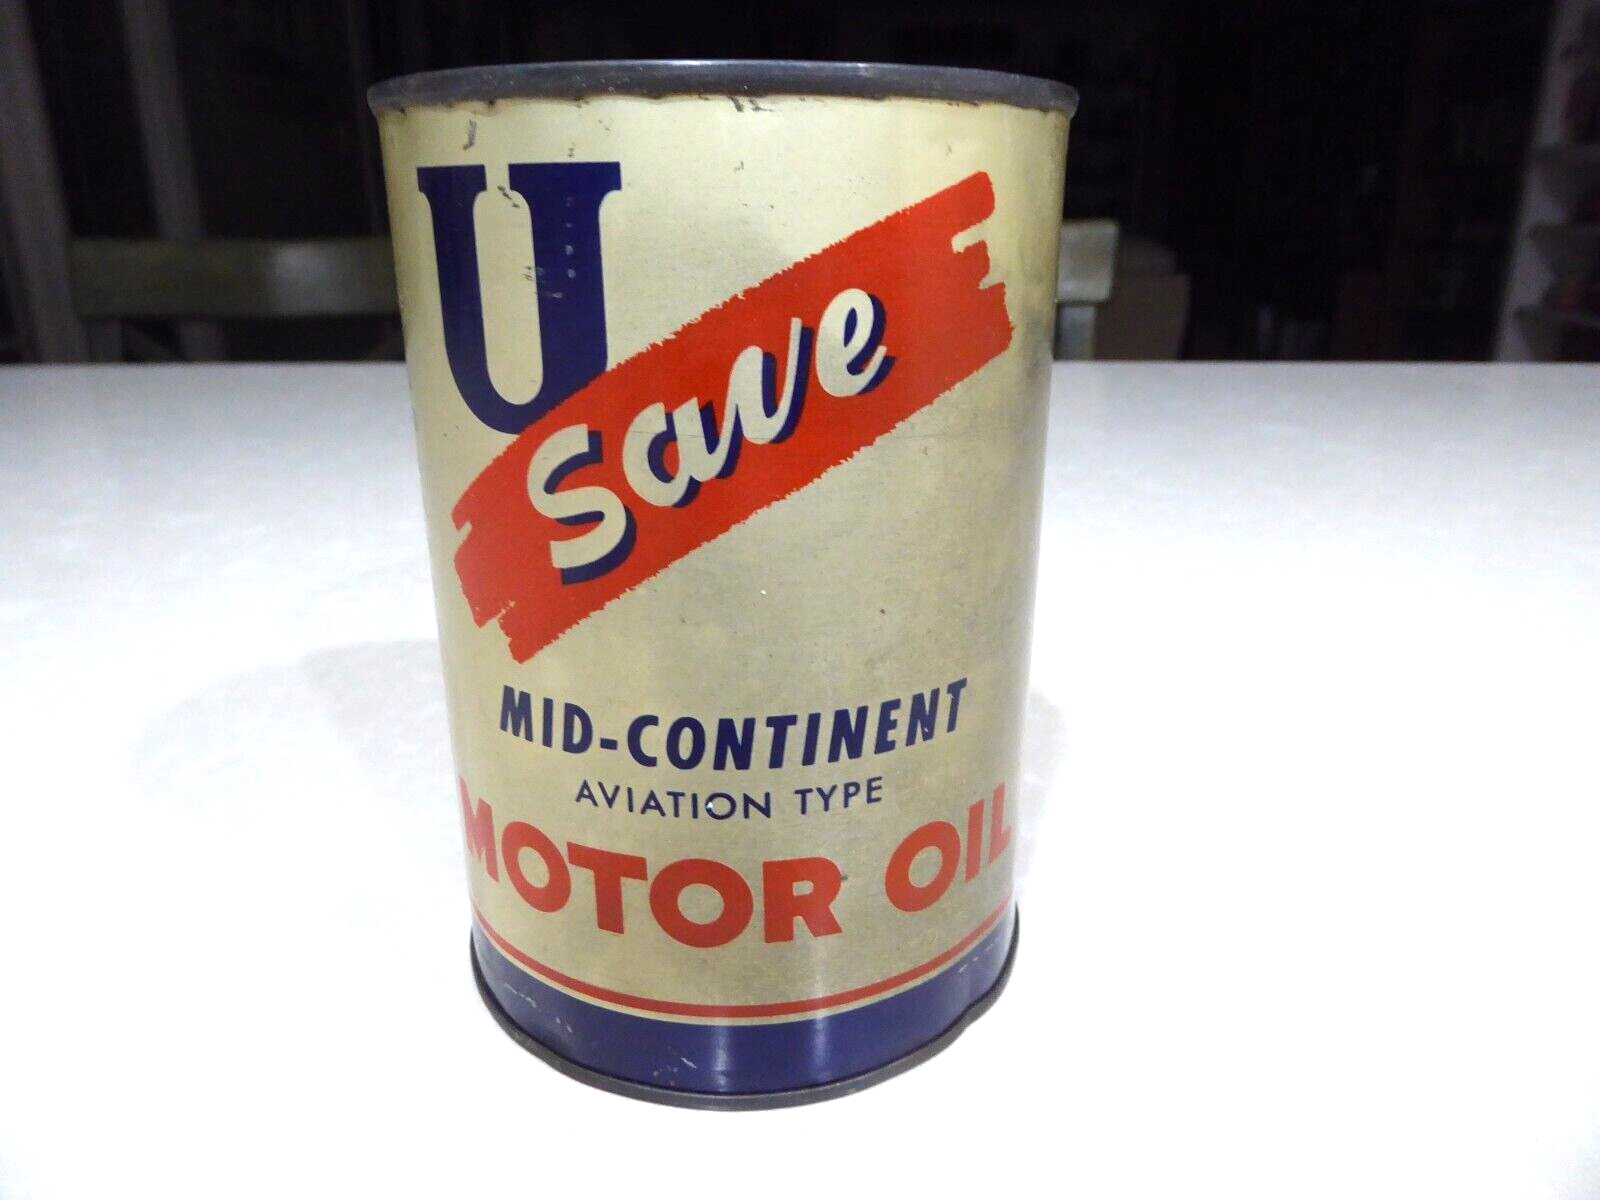 U Save Mid Continent Motor Oil Aviation Type Quart Tin can